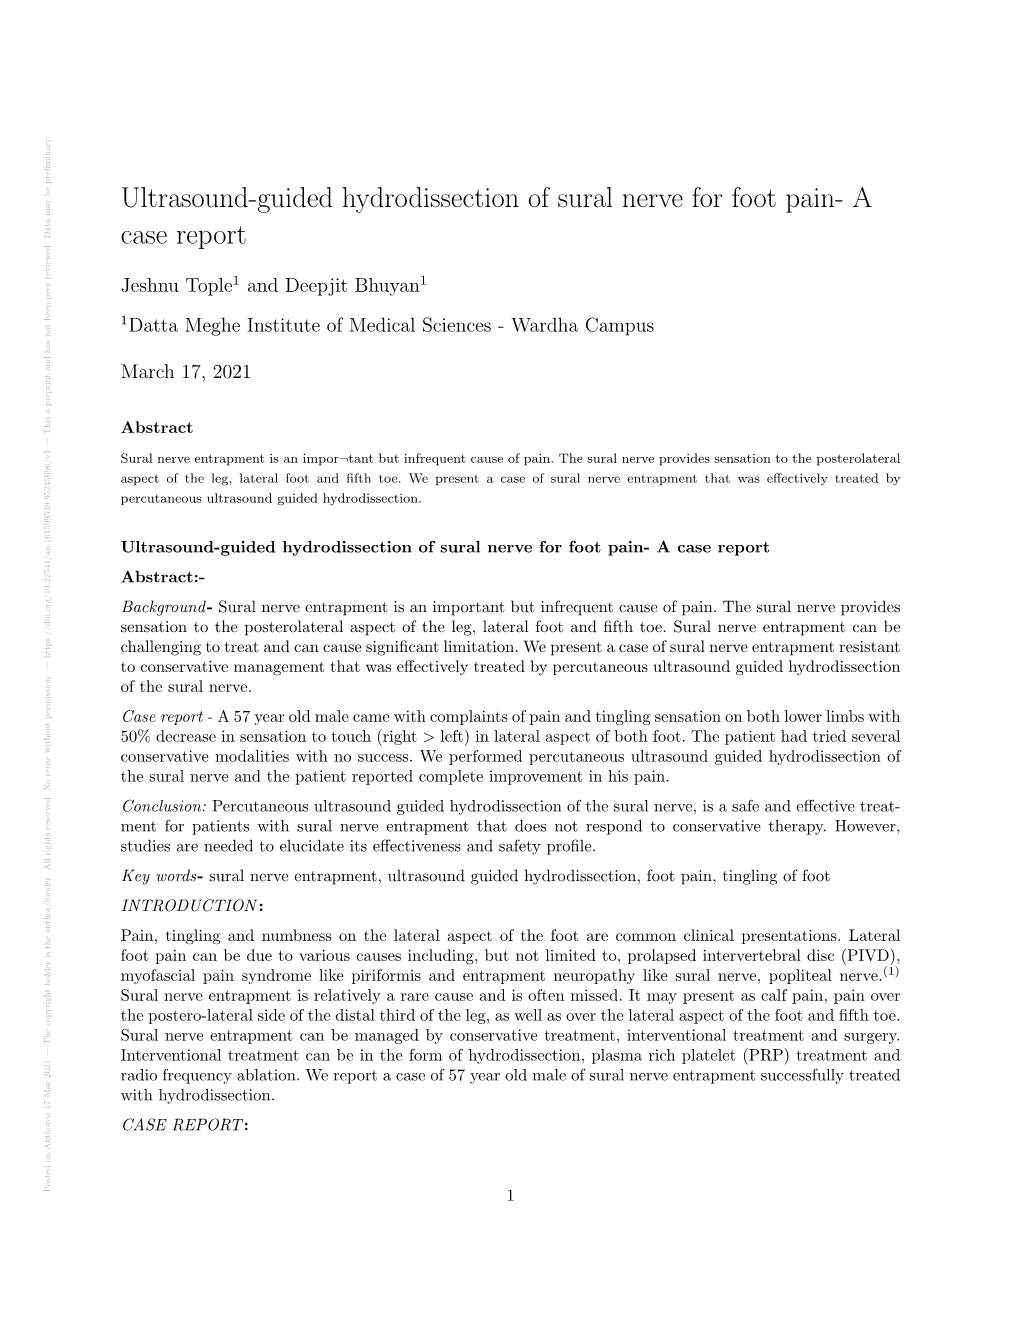 Ultrasound-Guided Hydrodissection of Sural Nerve for Foot Pain- a Case Report